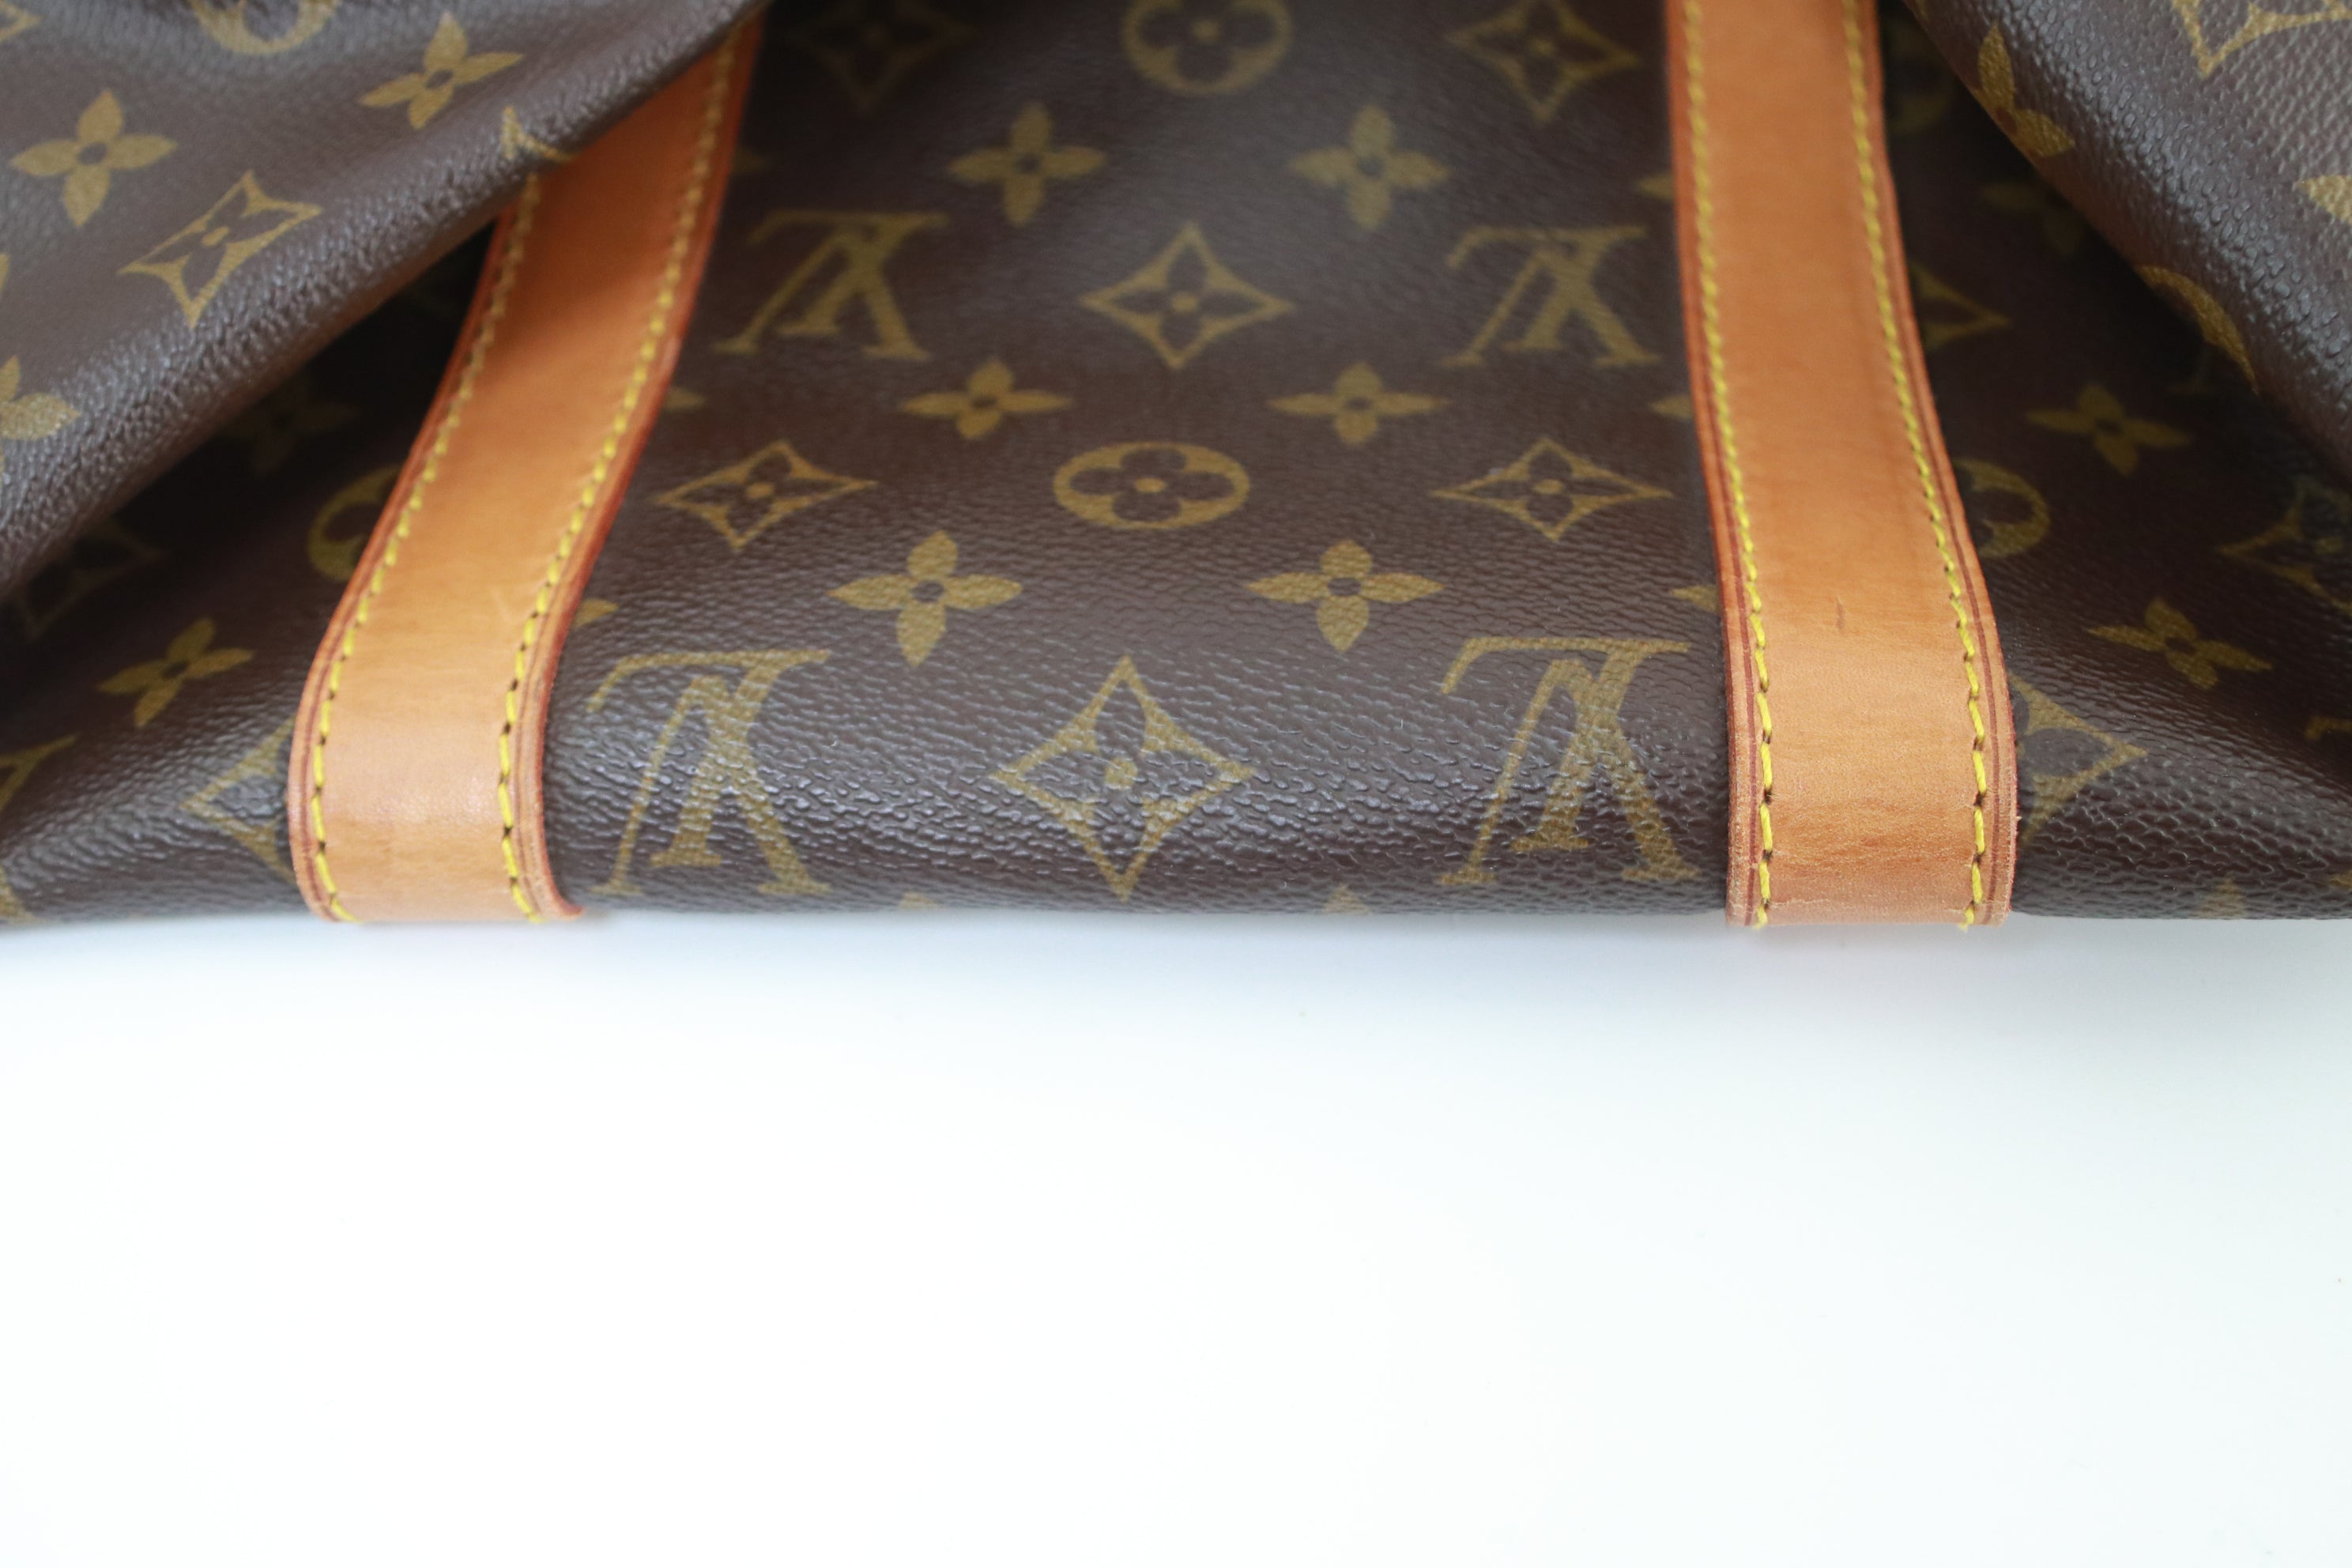 LOUIS VUITTON LOUIS VUITTON Van Gogh Keepall Bandouliere 50 Boston bag  M43347 leather M43347｜Product Code：2101217381734｜BRAND OFF Online Store